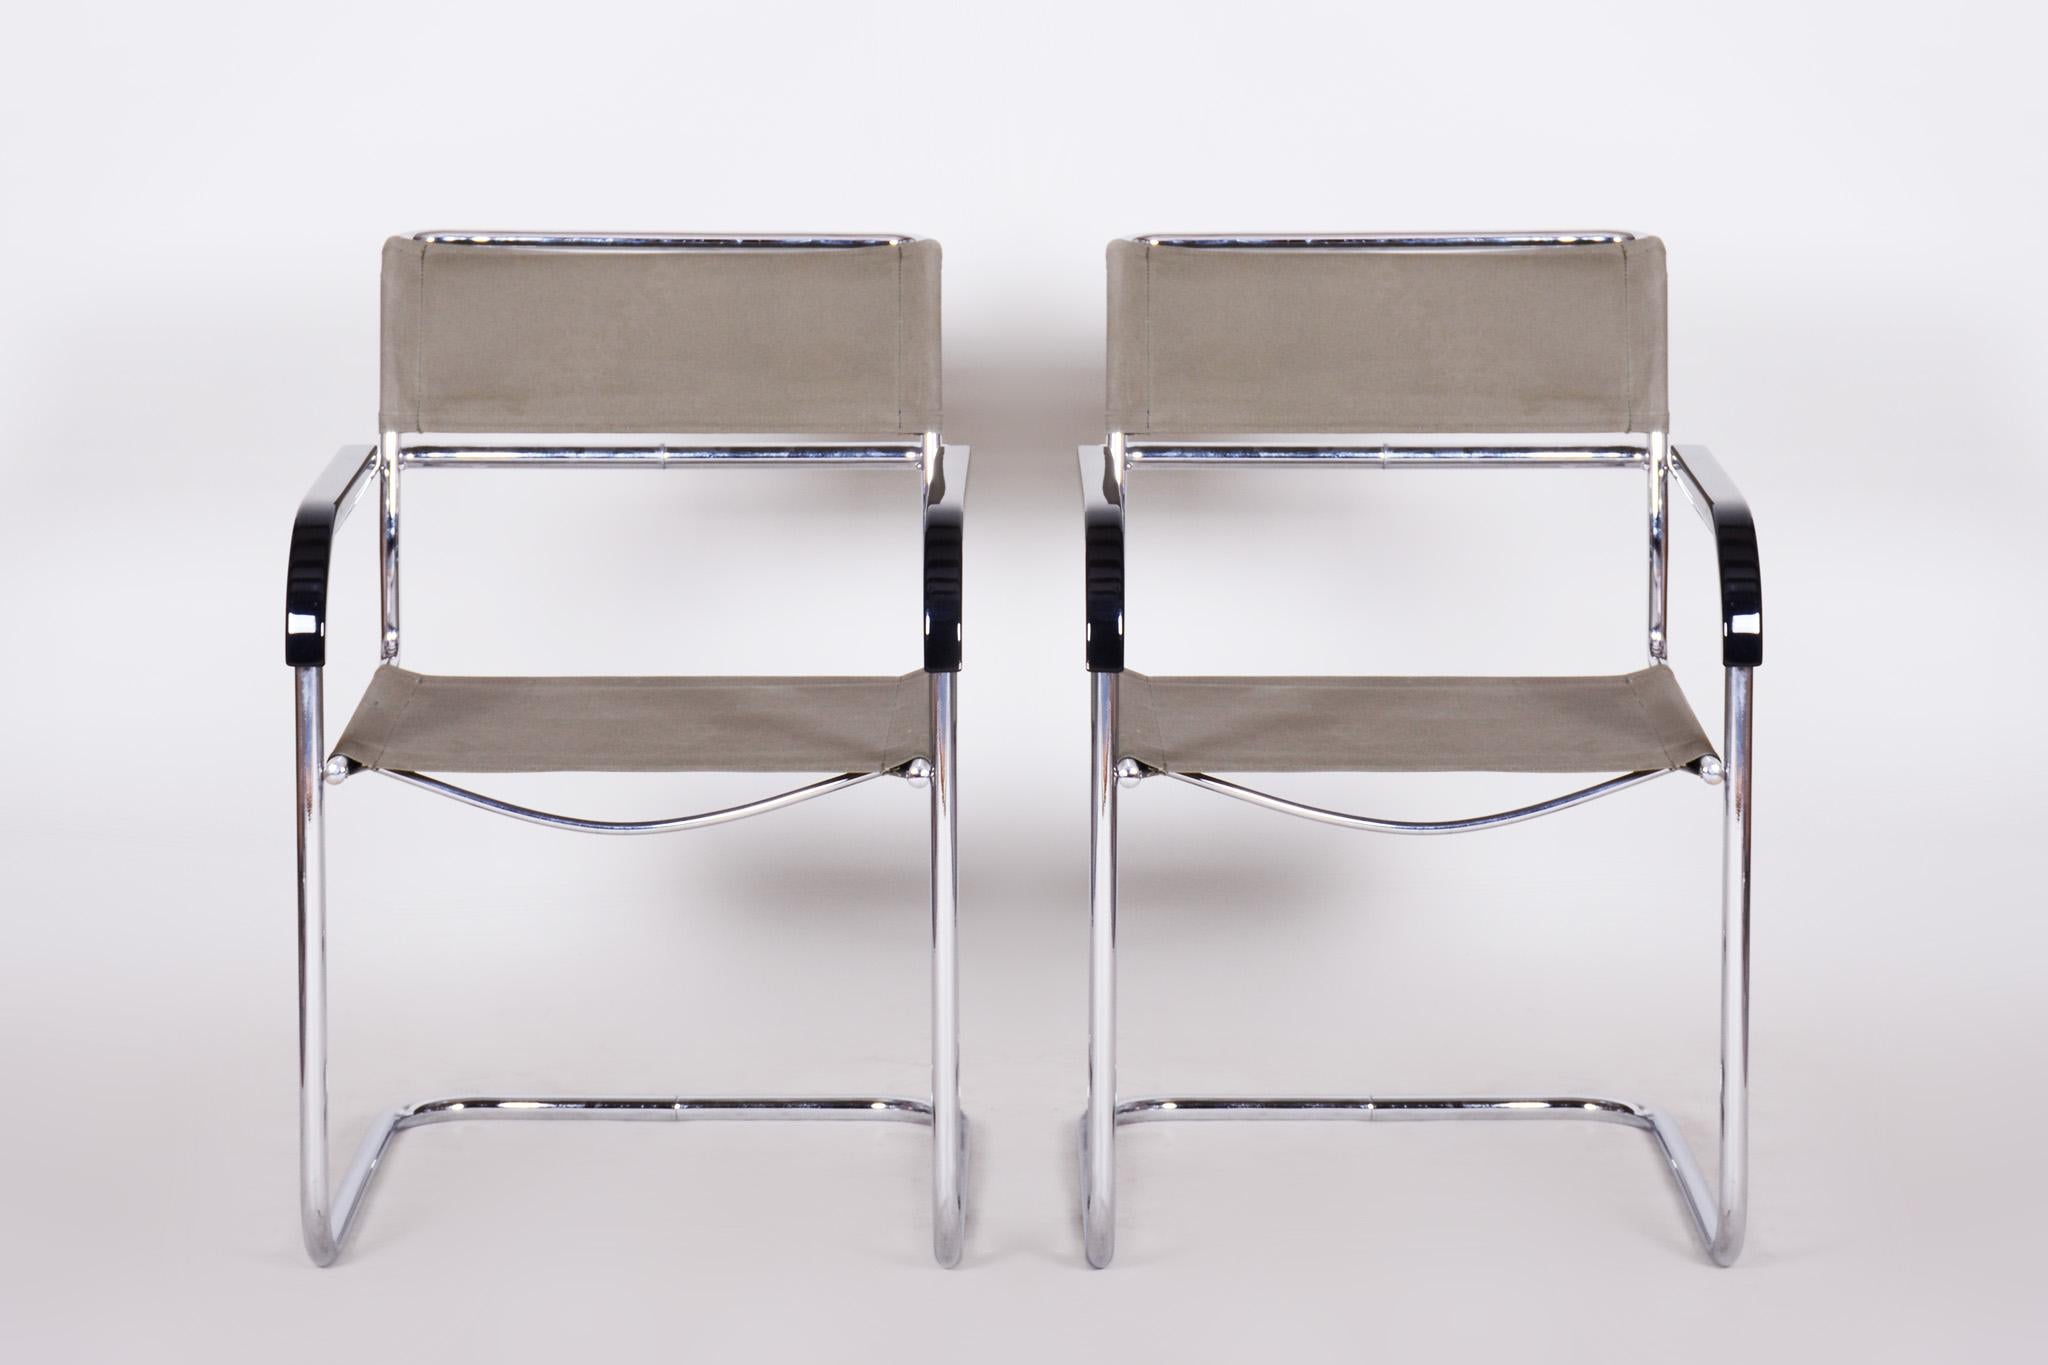 Pair of Czech Bauhaus Armchairs, Marcel Breuer and Thonet, Chrome, Fabric, 1930s For Sale 4